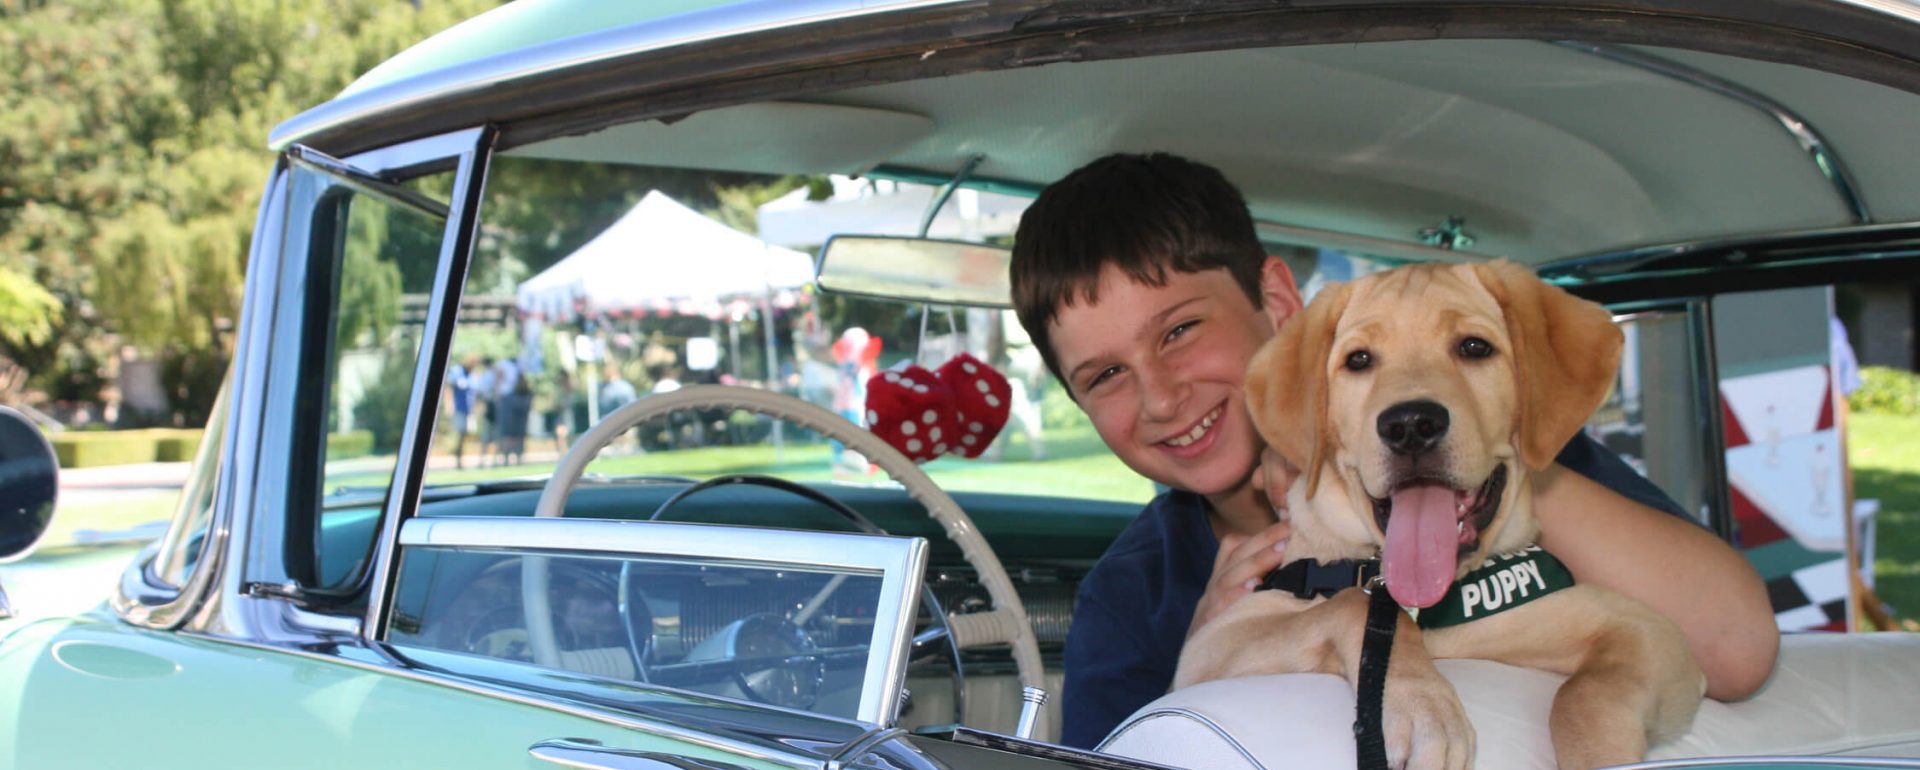 A young puppy raiser sits in the front seat of a vintage car with his guide dog puppy.